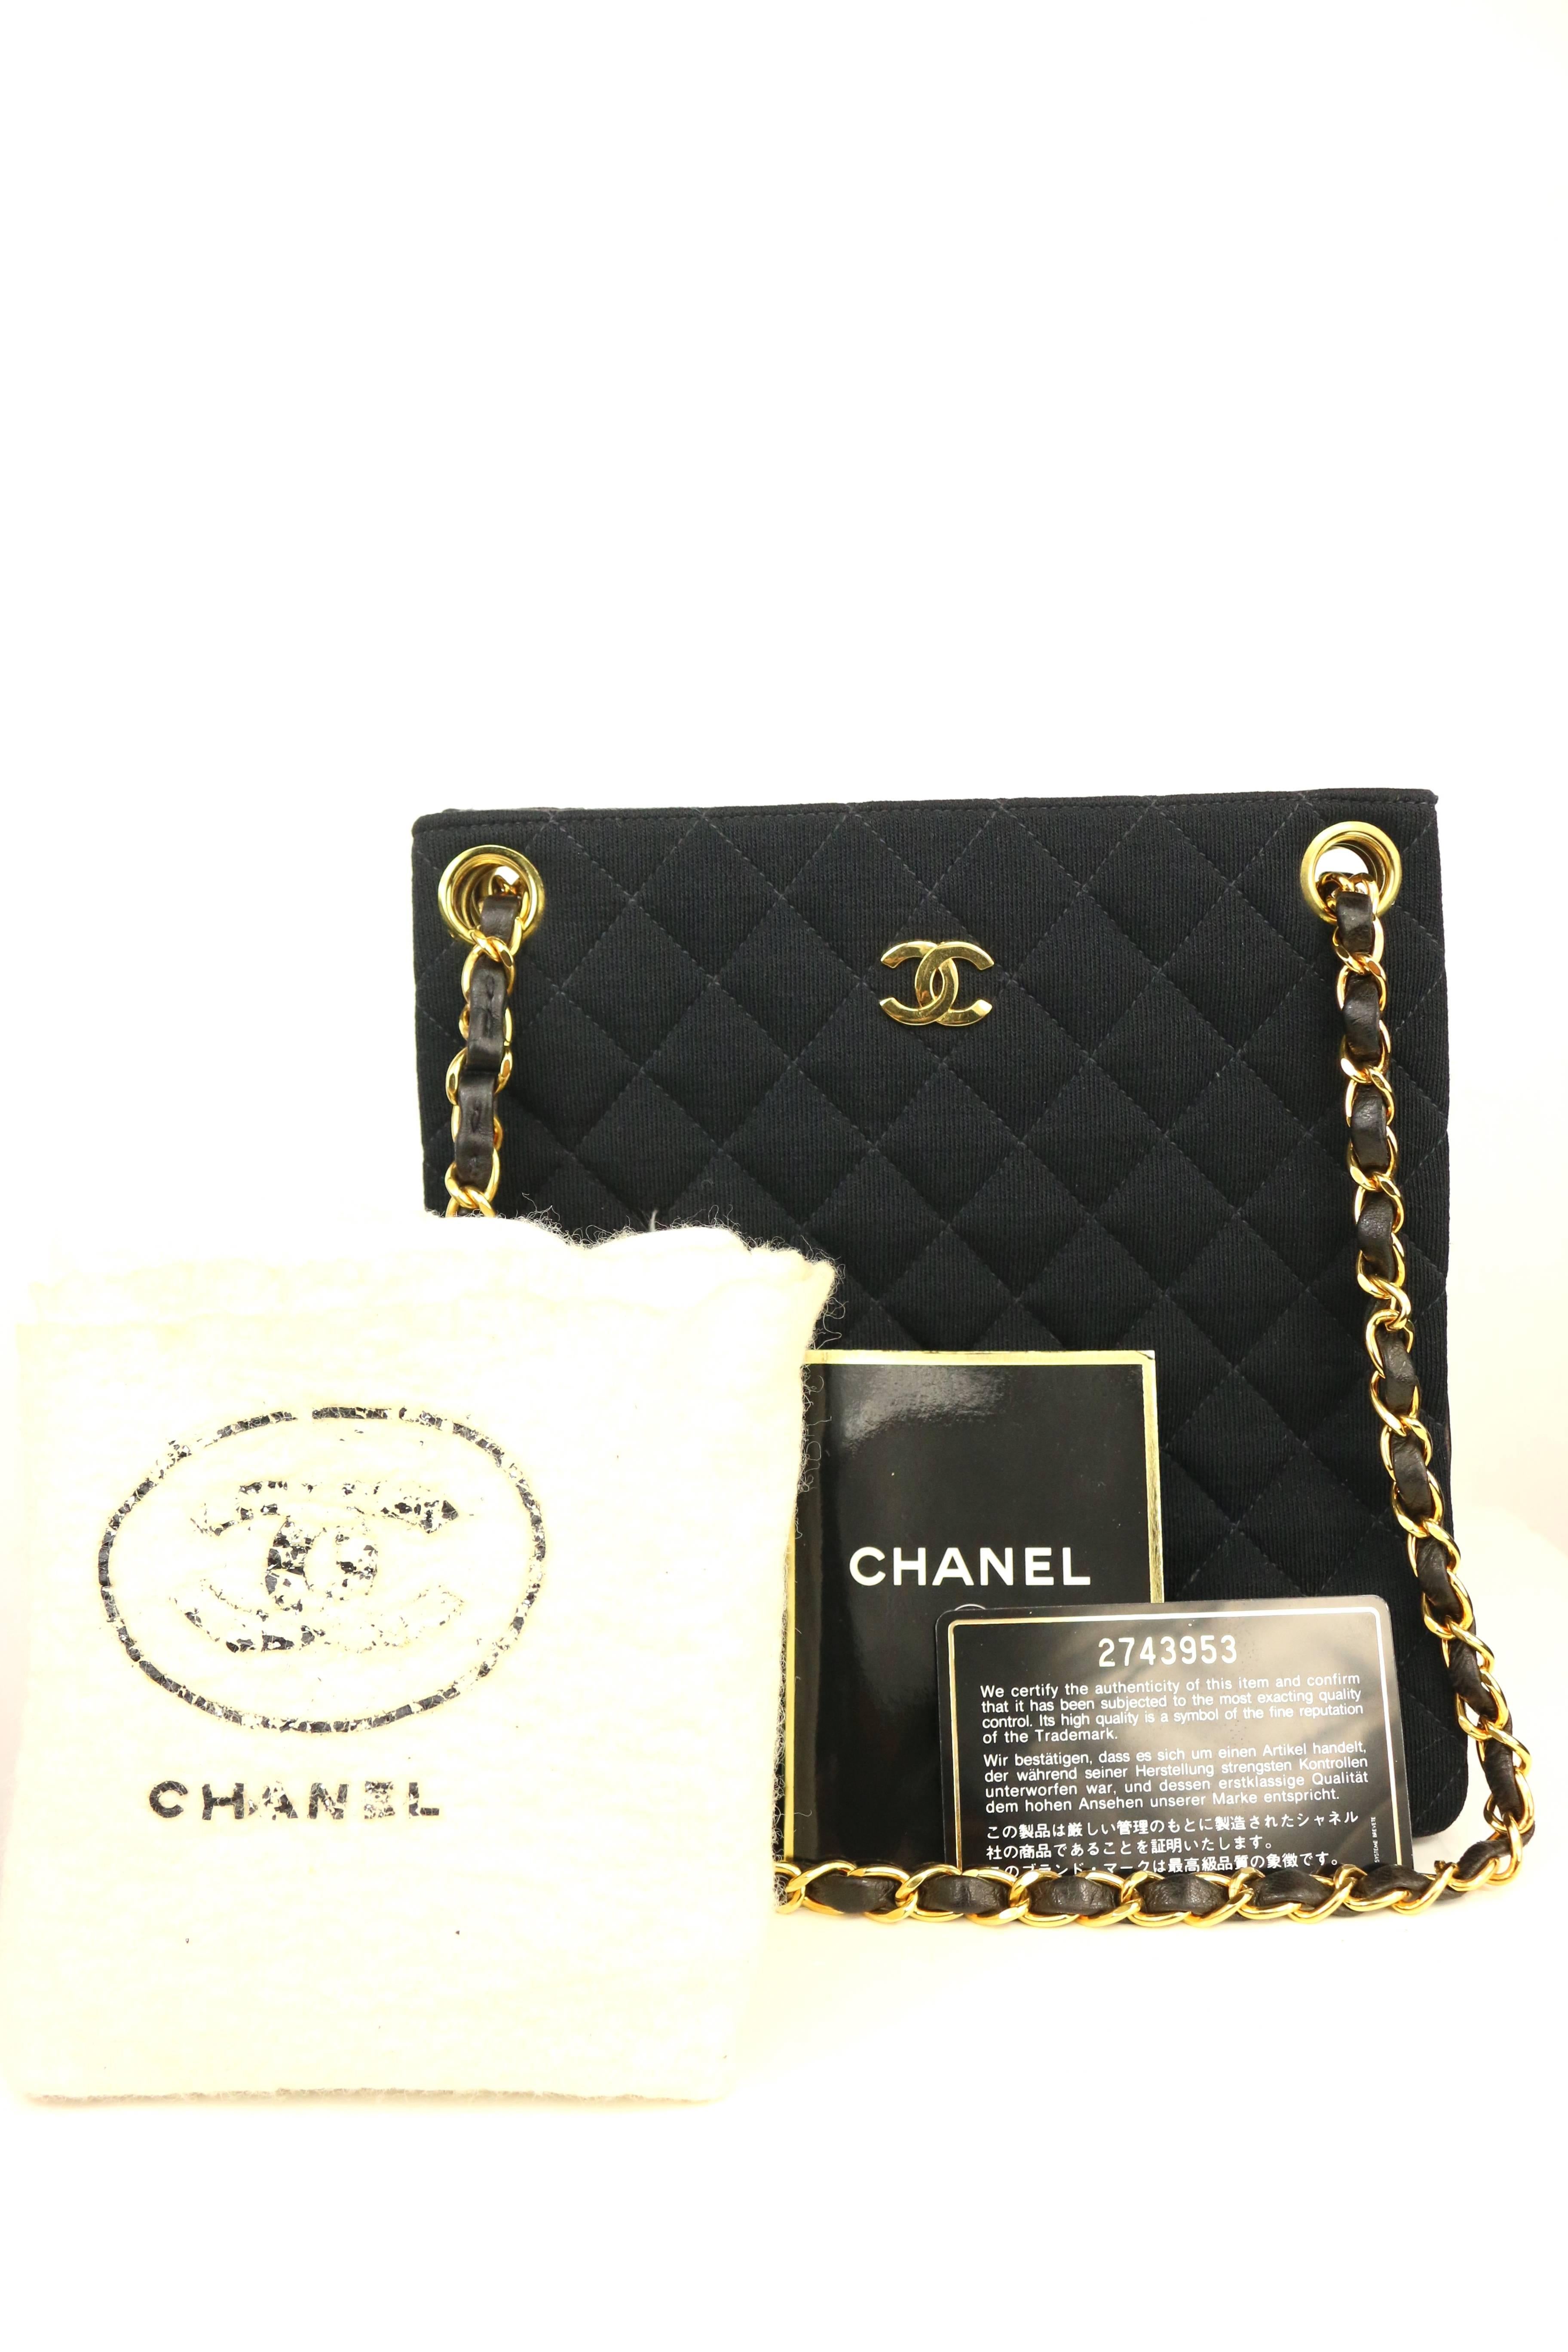 Chanel Black Quilted Cotton and Leather Gold Chain Shoulder Bag  2